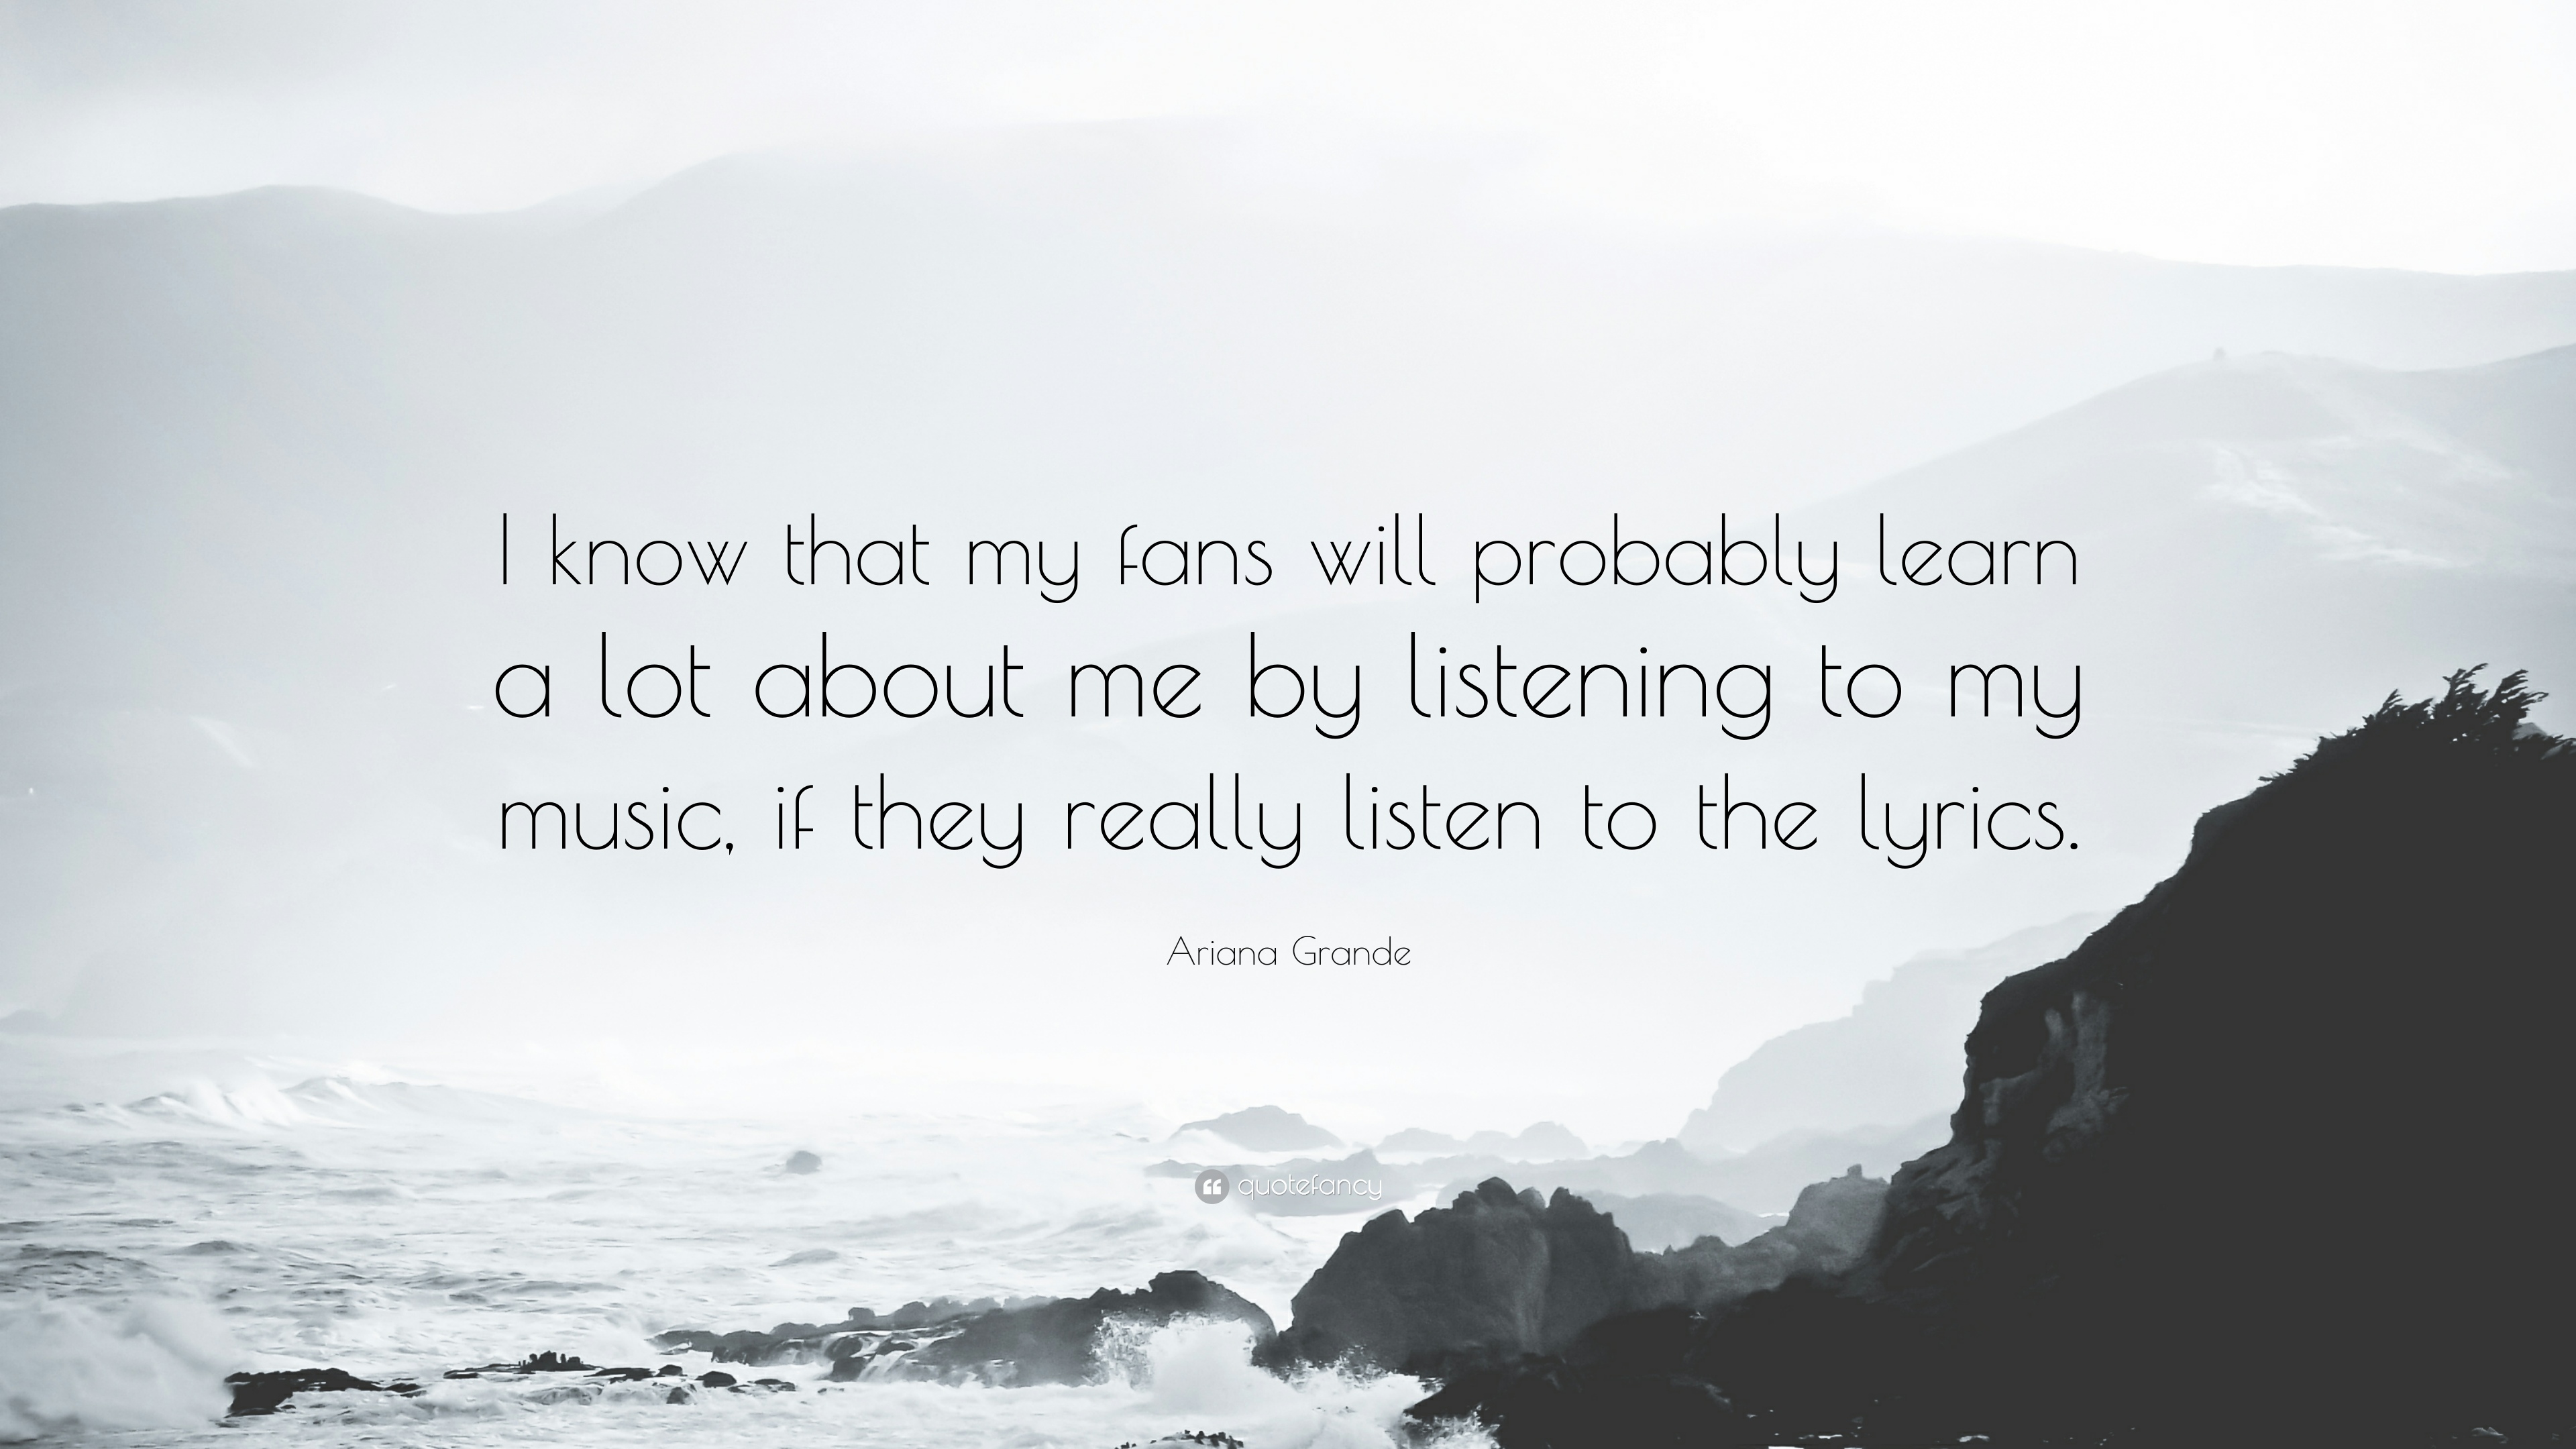 Ariana Grande Quote: “I know that my fans will probably learn a lot about me by